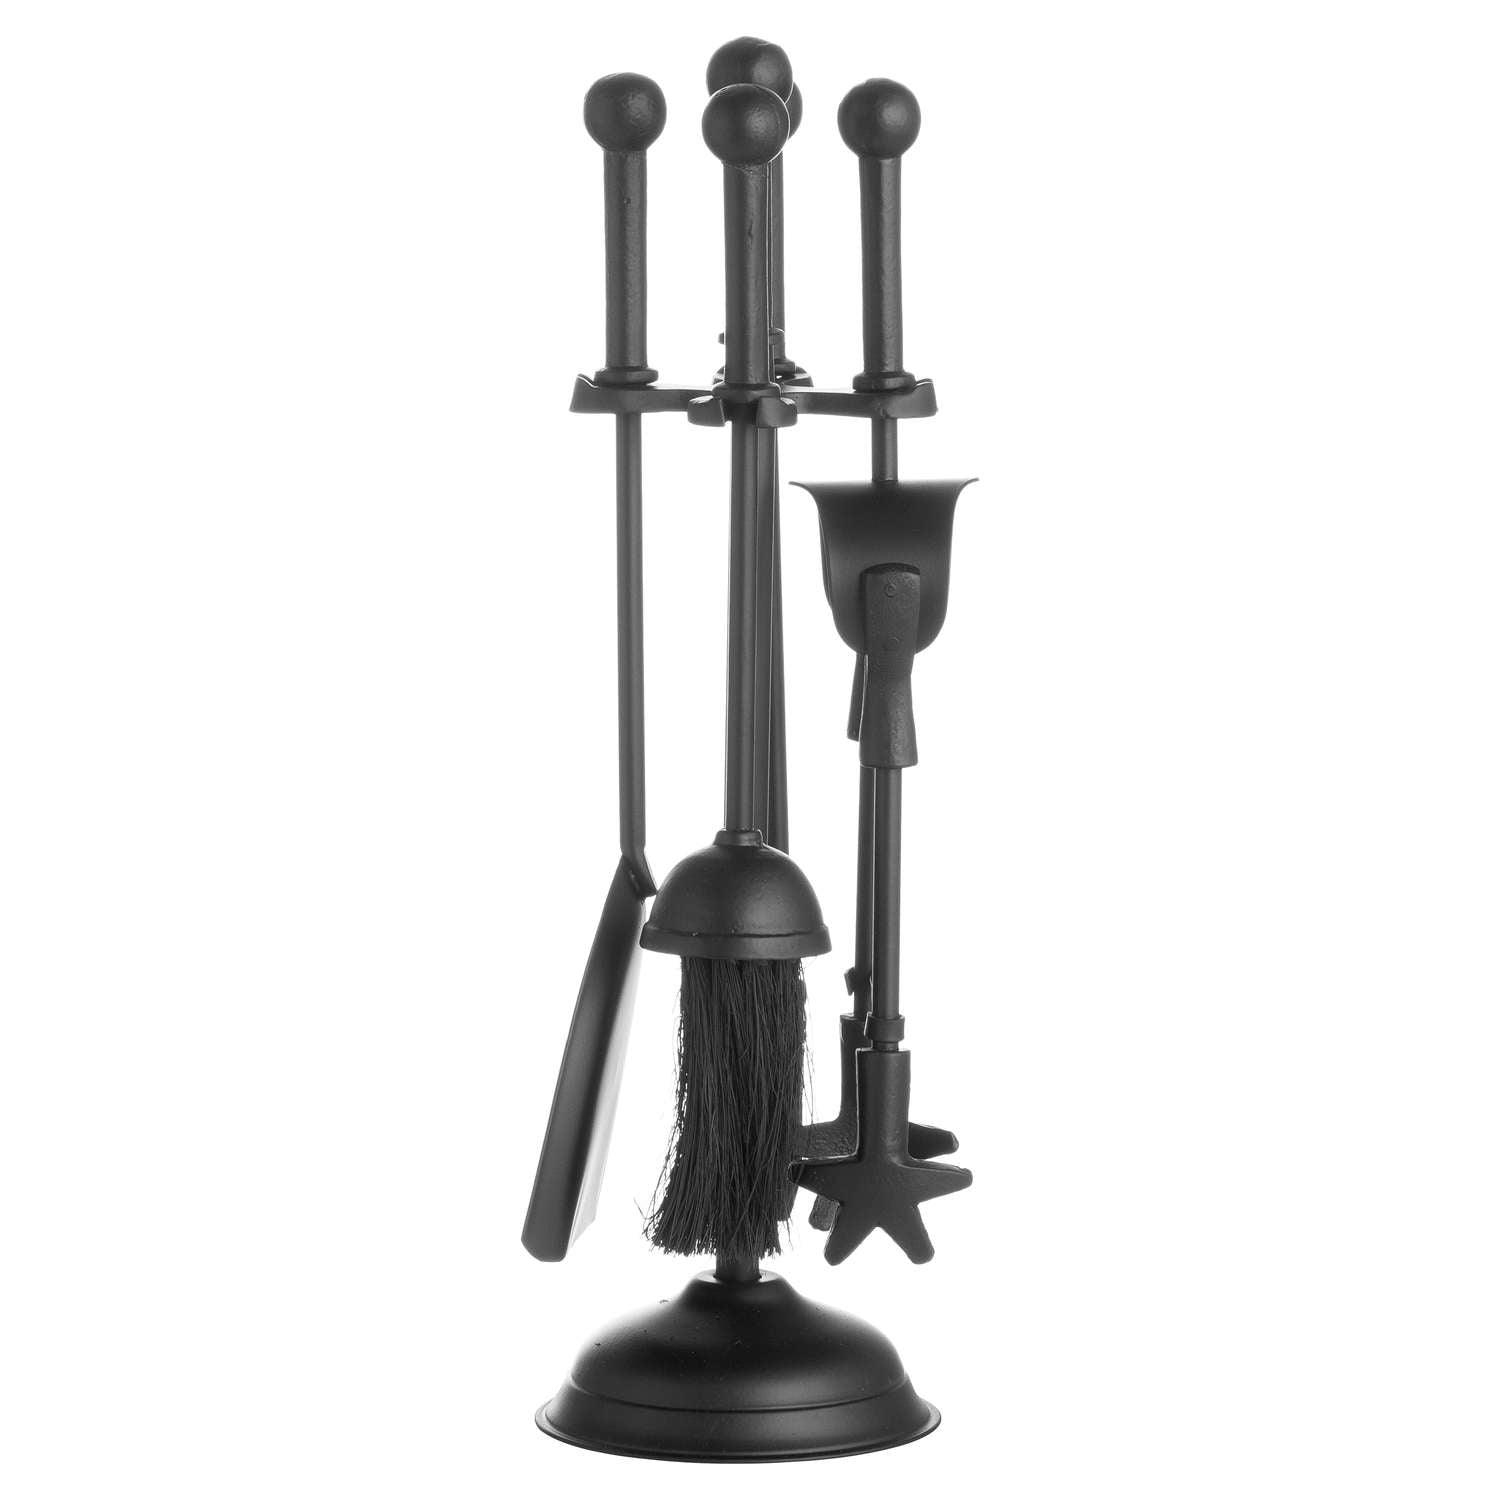 Ball Topped Companion Set In Black - Vookoo Lifestyle